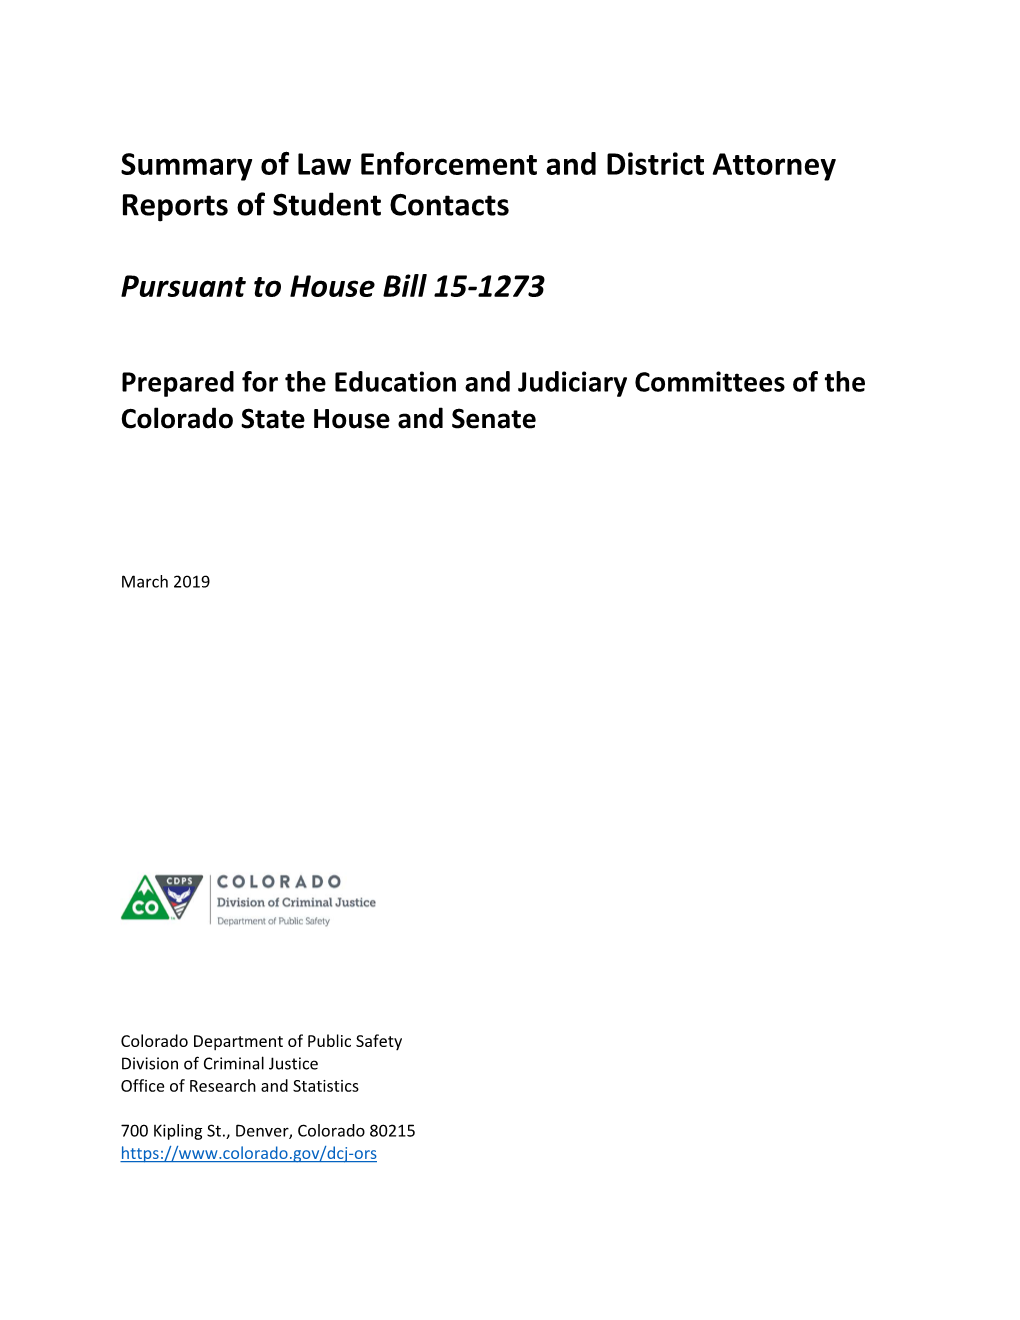 Summary of Law Enforcement and District Attorney Reports of Student Contacts